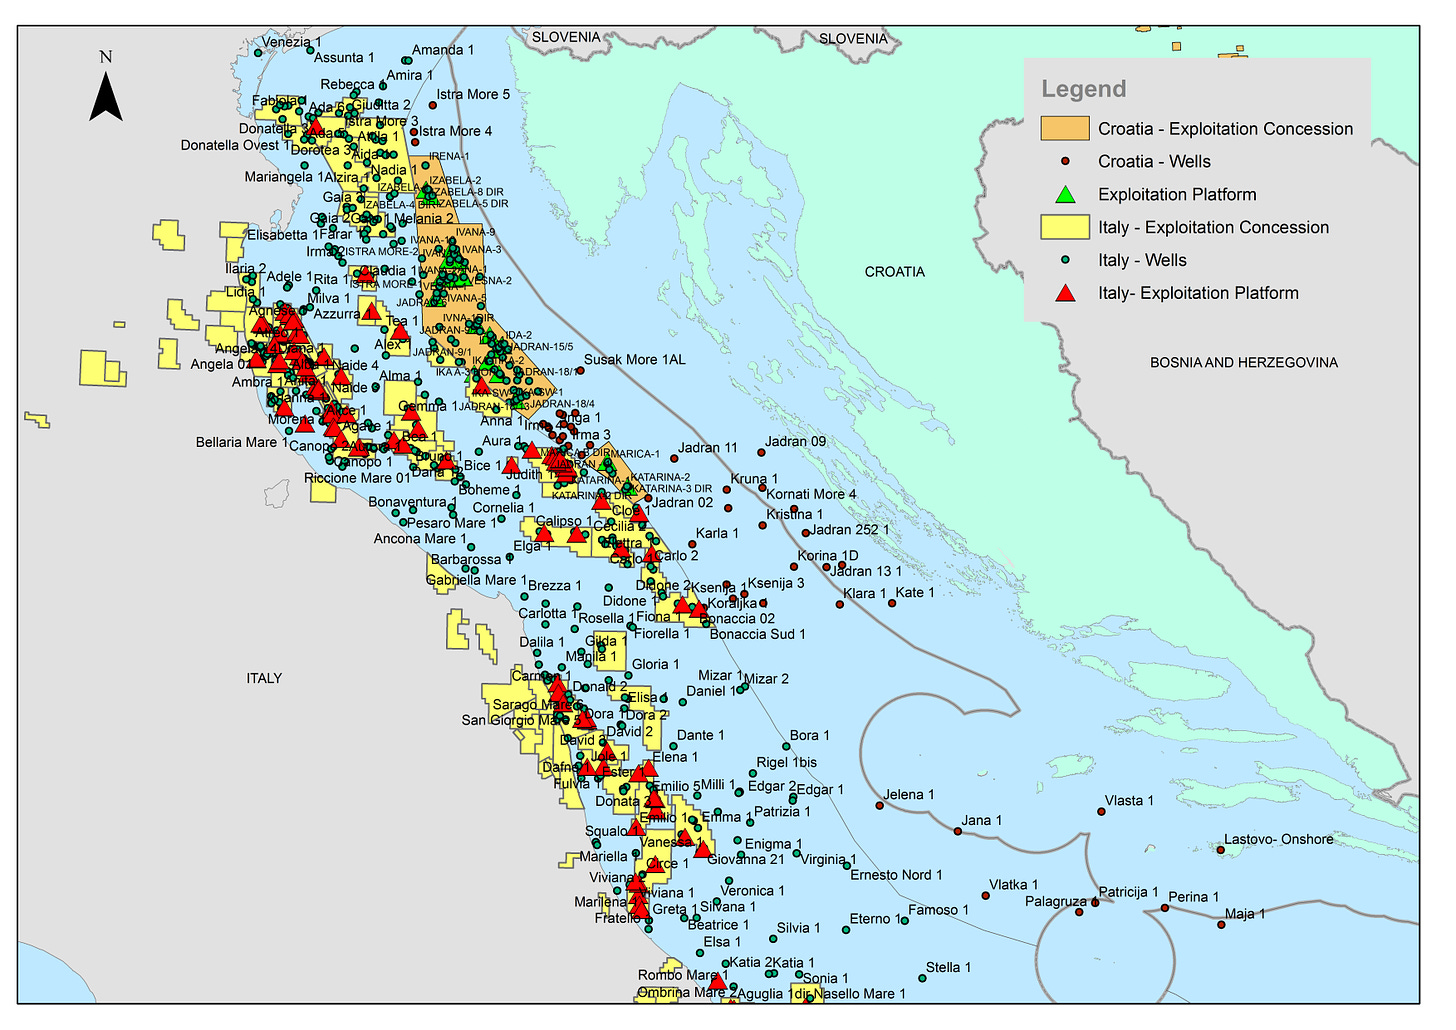 Comparison of exploration and exploitation of hydrocarbons in Croatian and in Italian part of the Adriatic sea